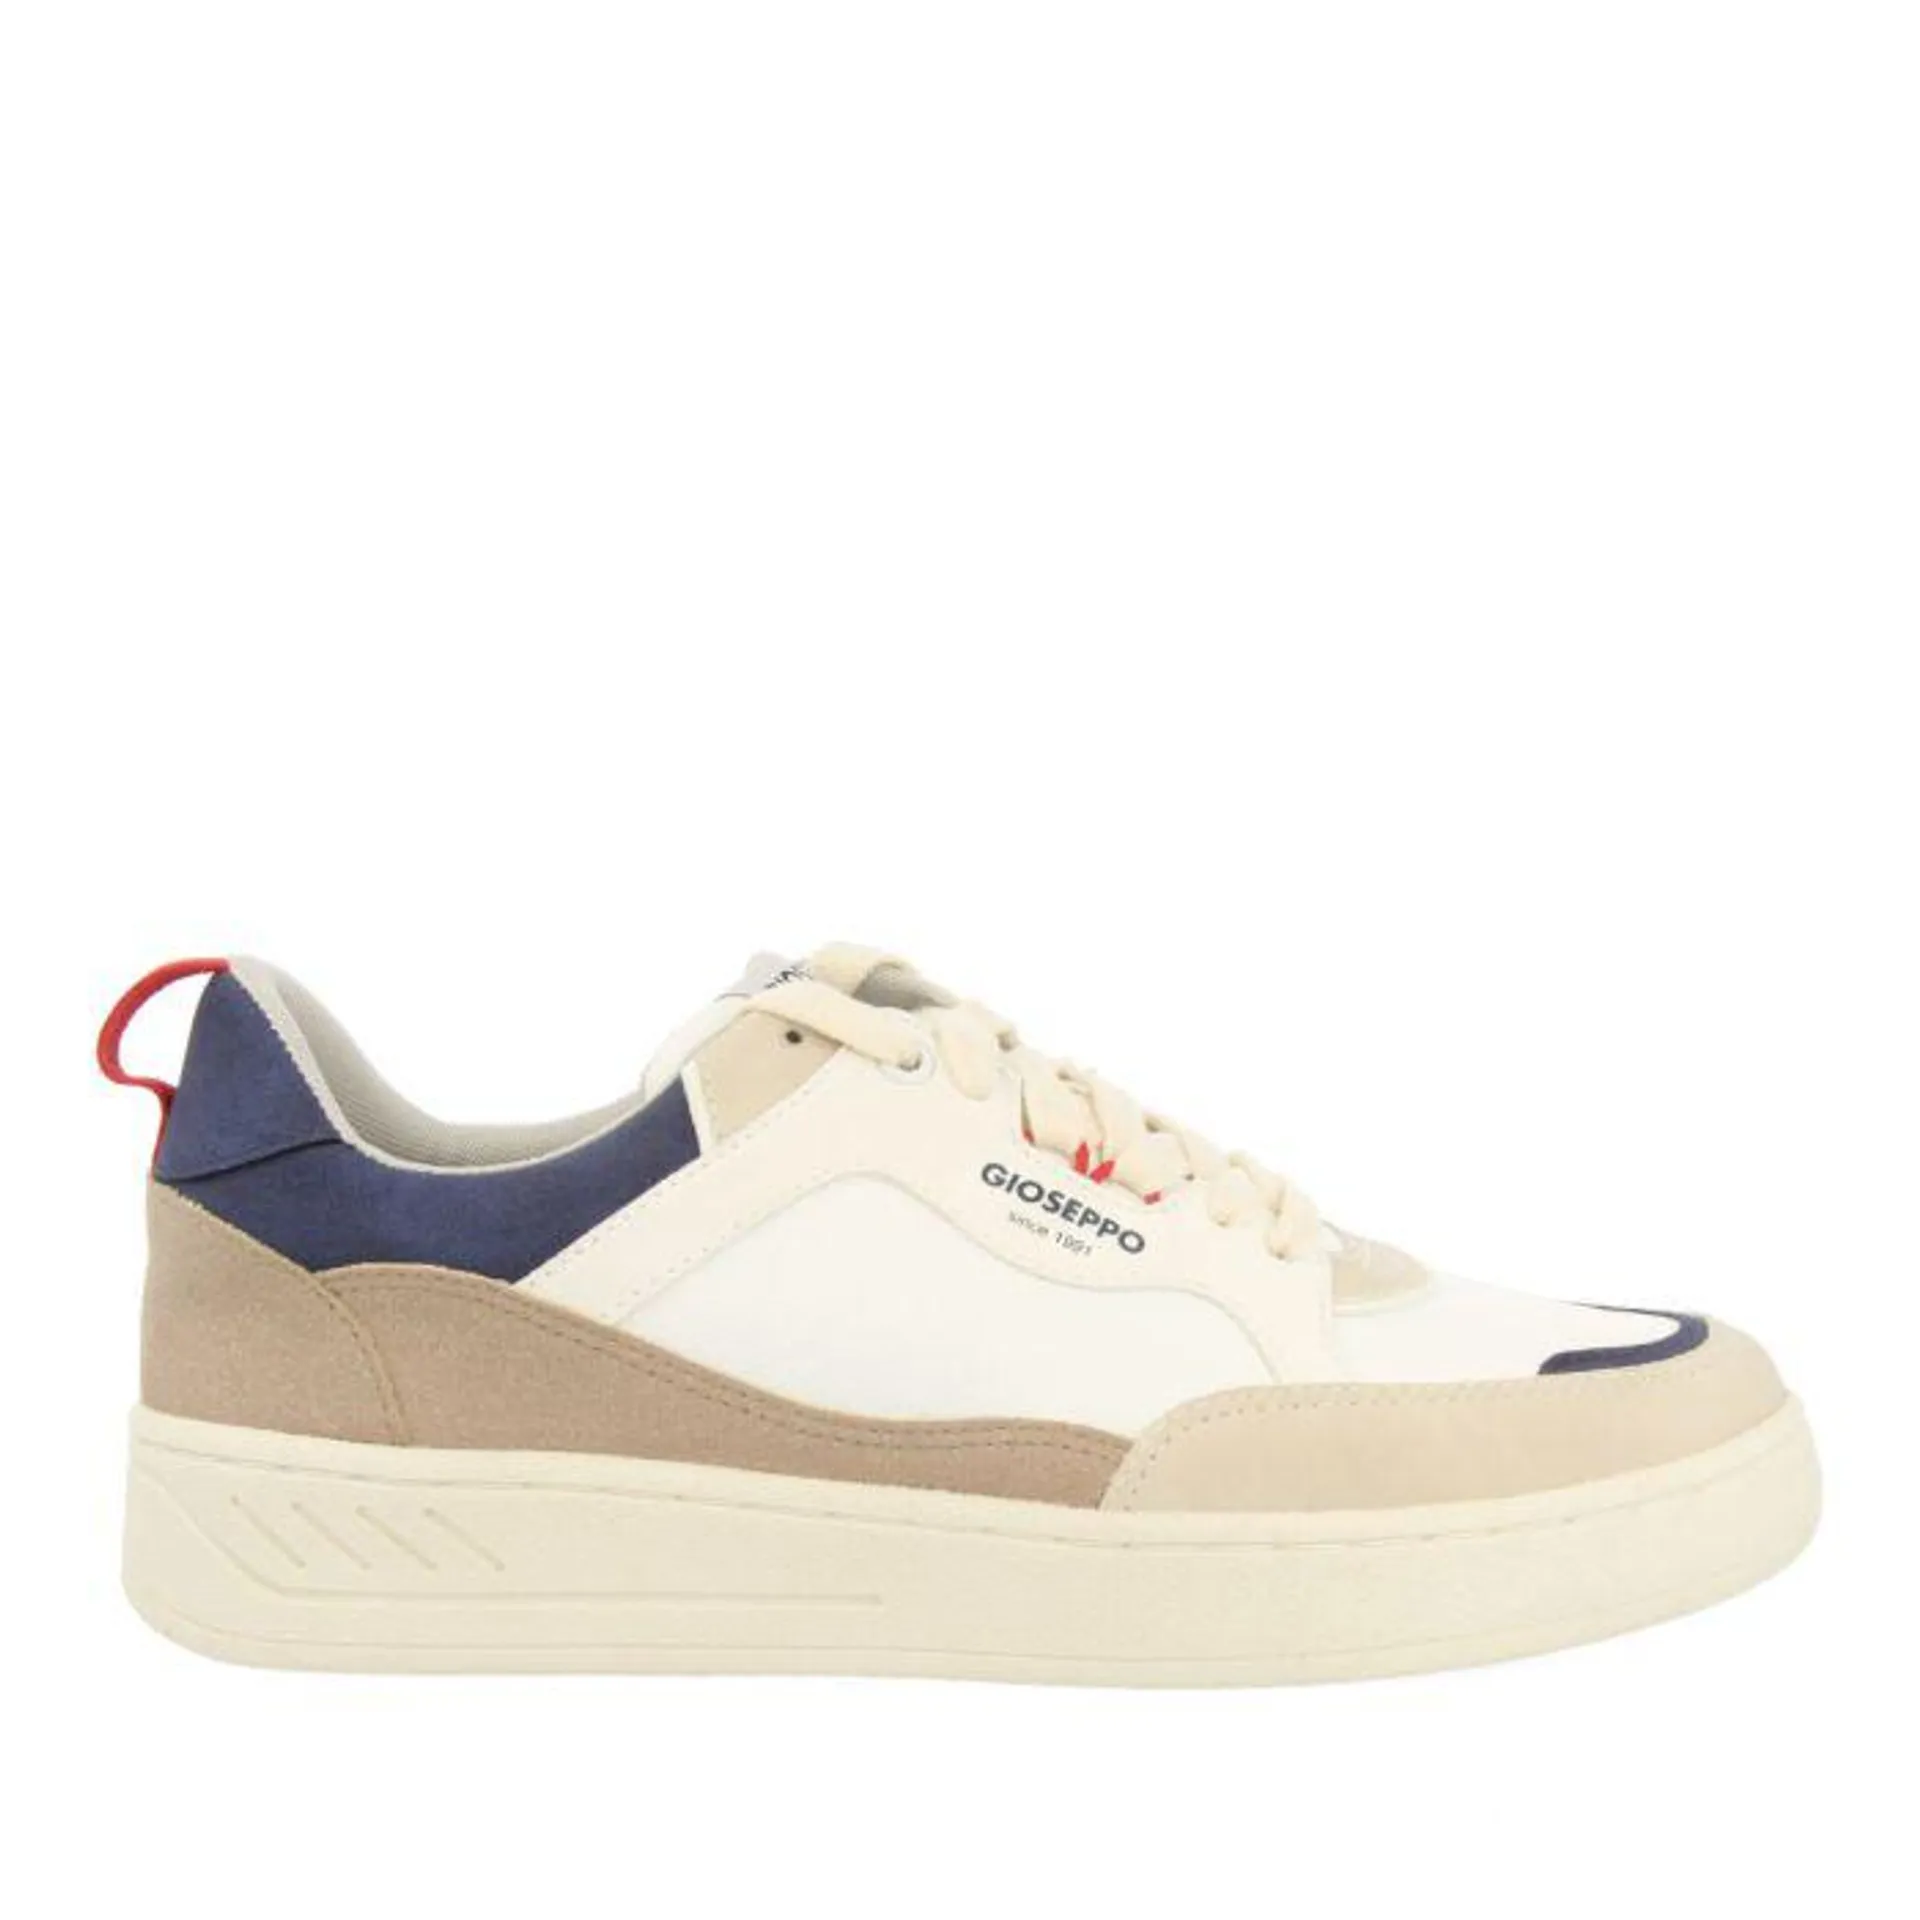 Kaunas men's white sneakers with navy blue and red accent pieces